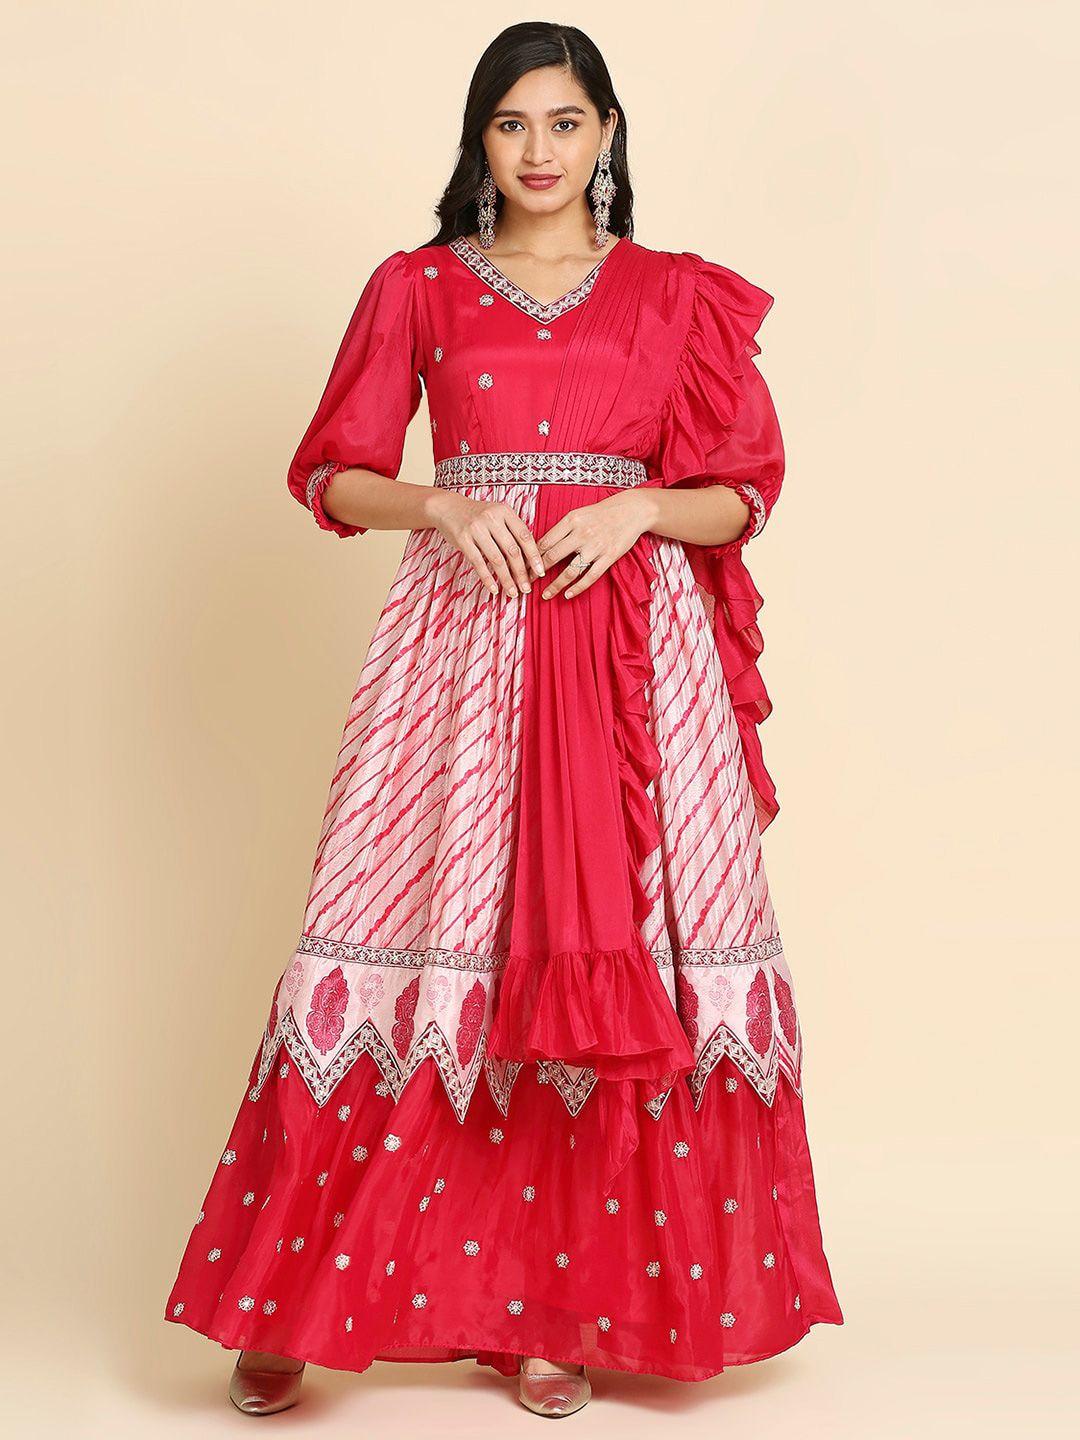 MADHURAM Tie And Dye Embroidered Chiffon Maxi Ethnic Dress With Belt